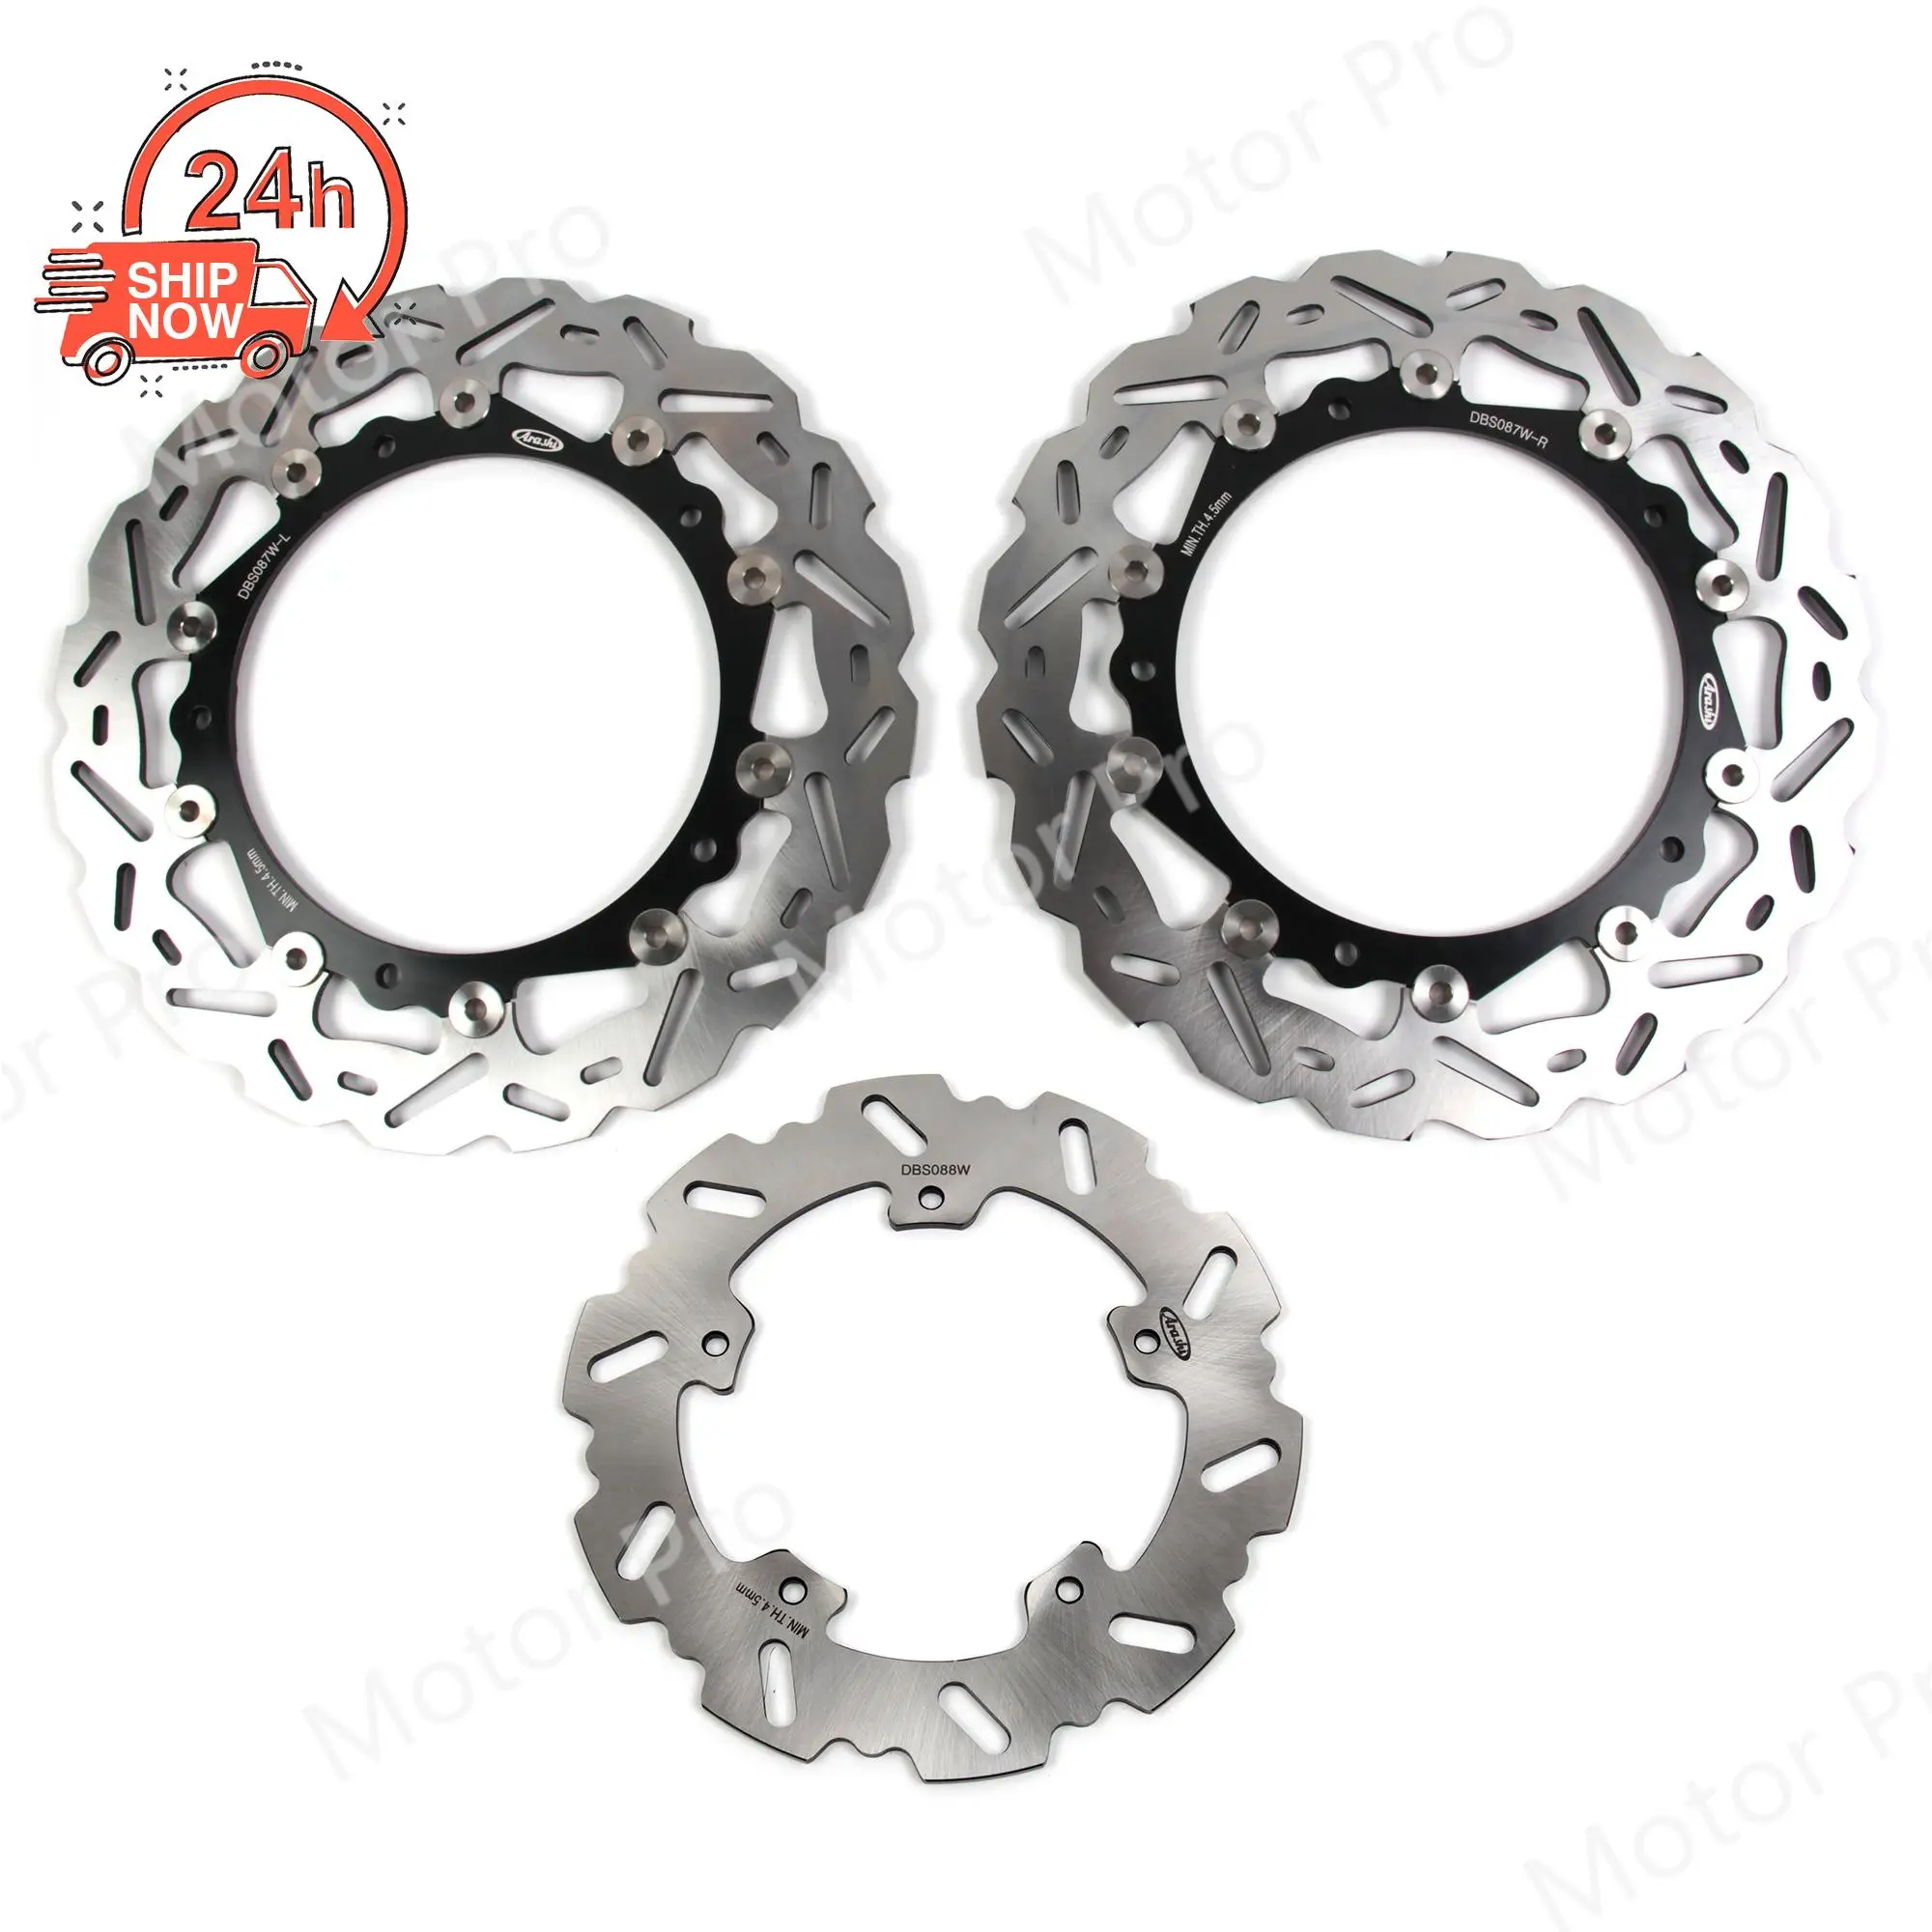 

For Bmw S1000R 2014 2015 Front Rear Brake Disc Disk Rotor Kit Motorcycle Accessories S 1000 R S1000 1000R 14 15 S1000RR BLACK